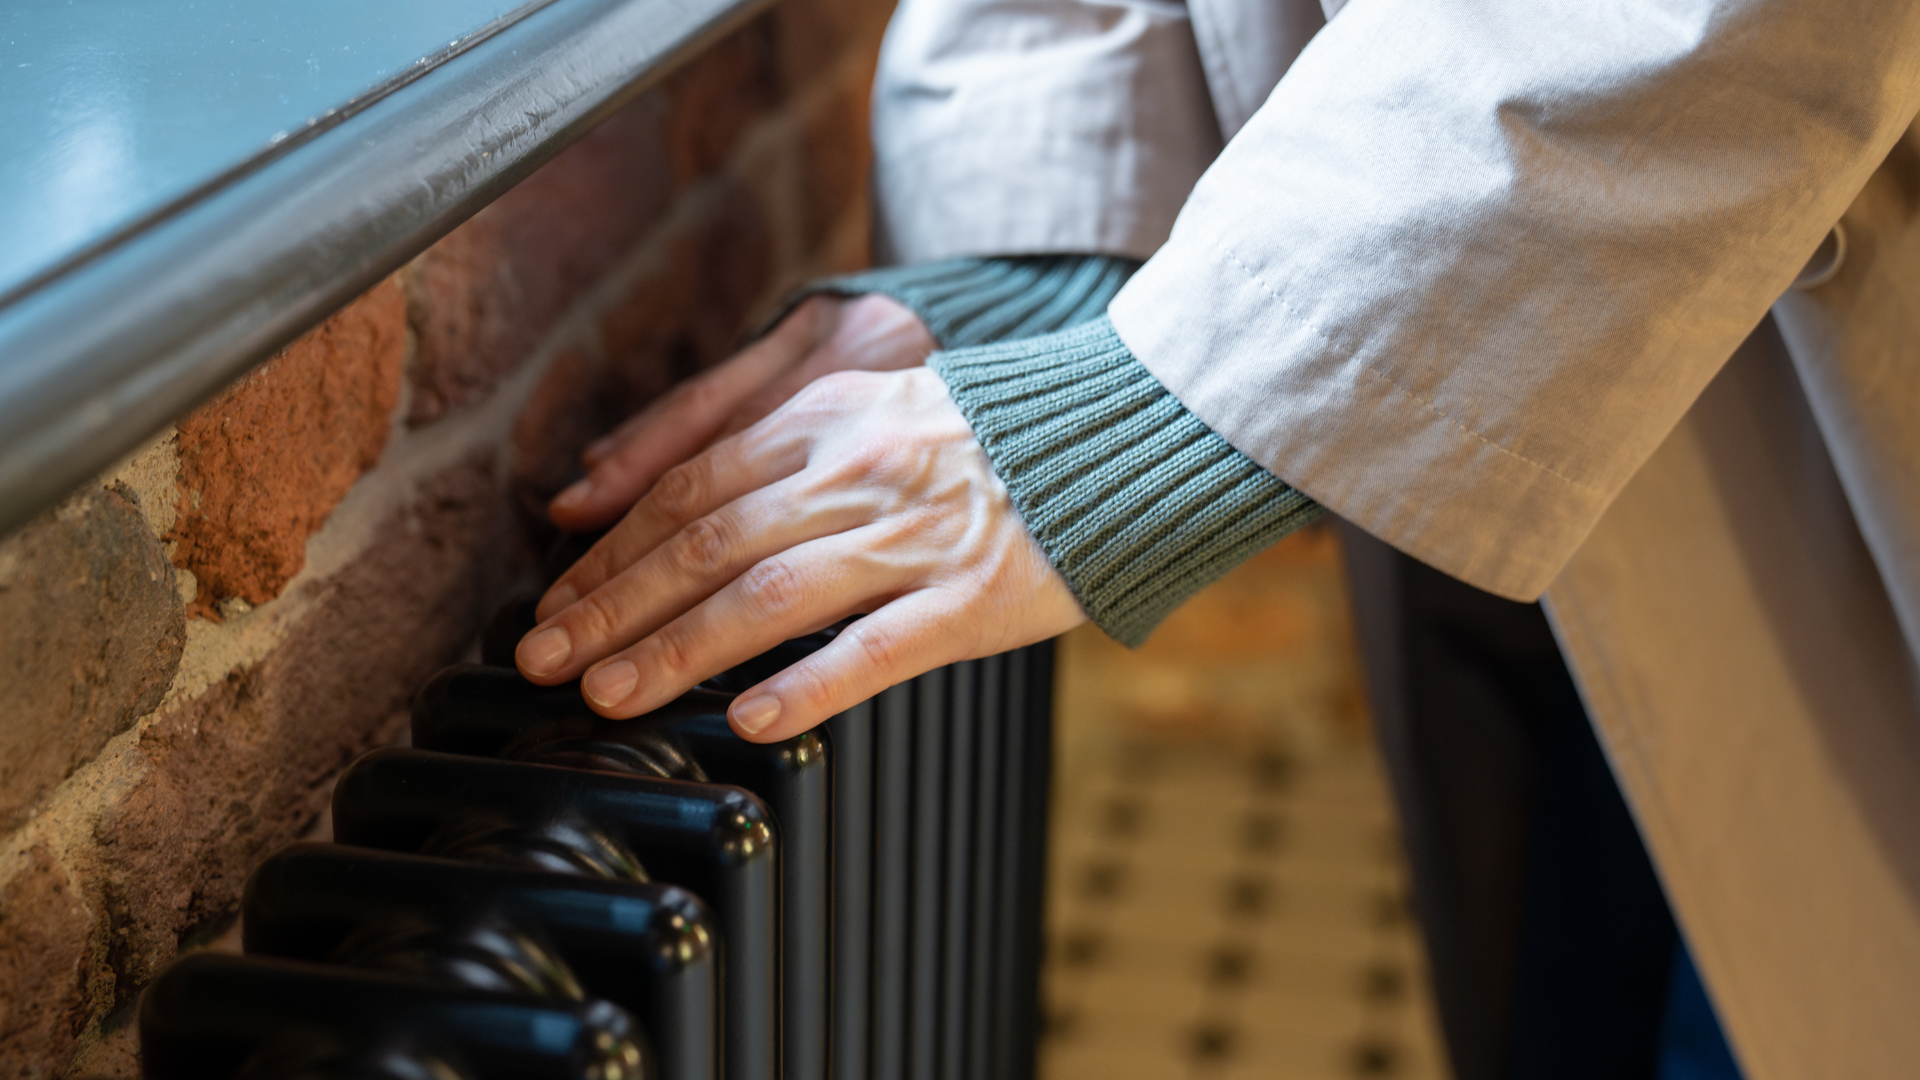 A lady warms her hands on a radiator